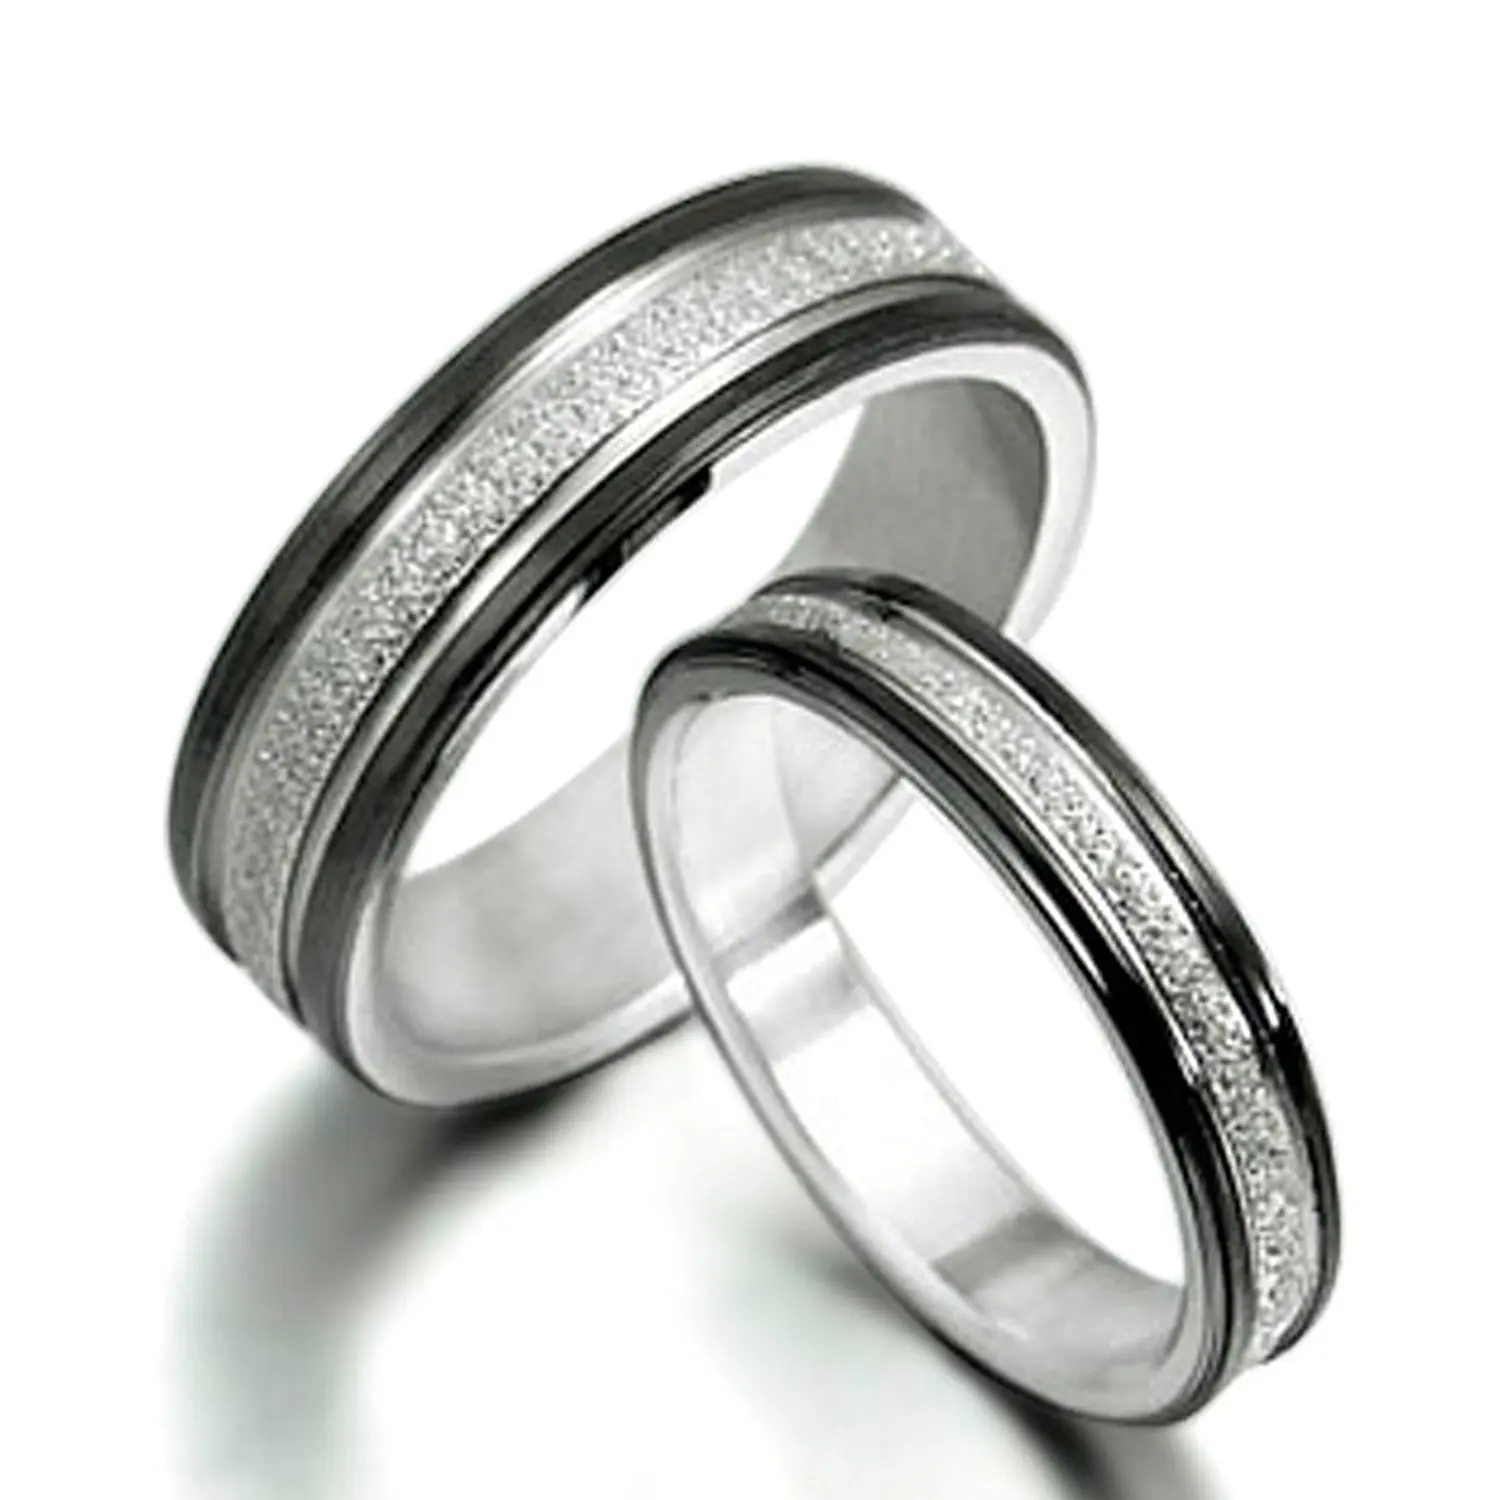 Cheap Size 4 5 Wedding Rings Find Size 4 5 Wedding Rings Deals On